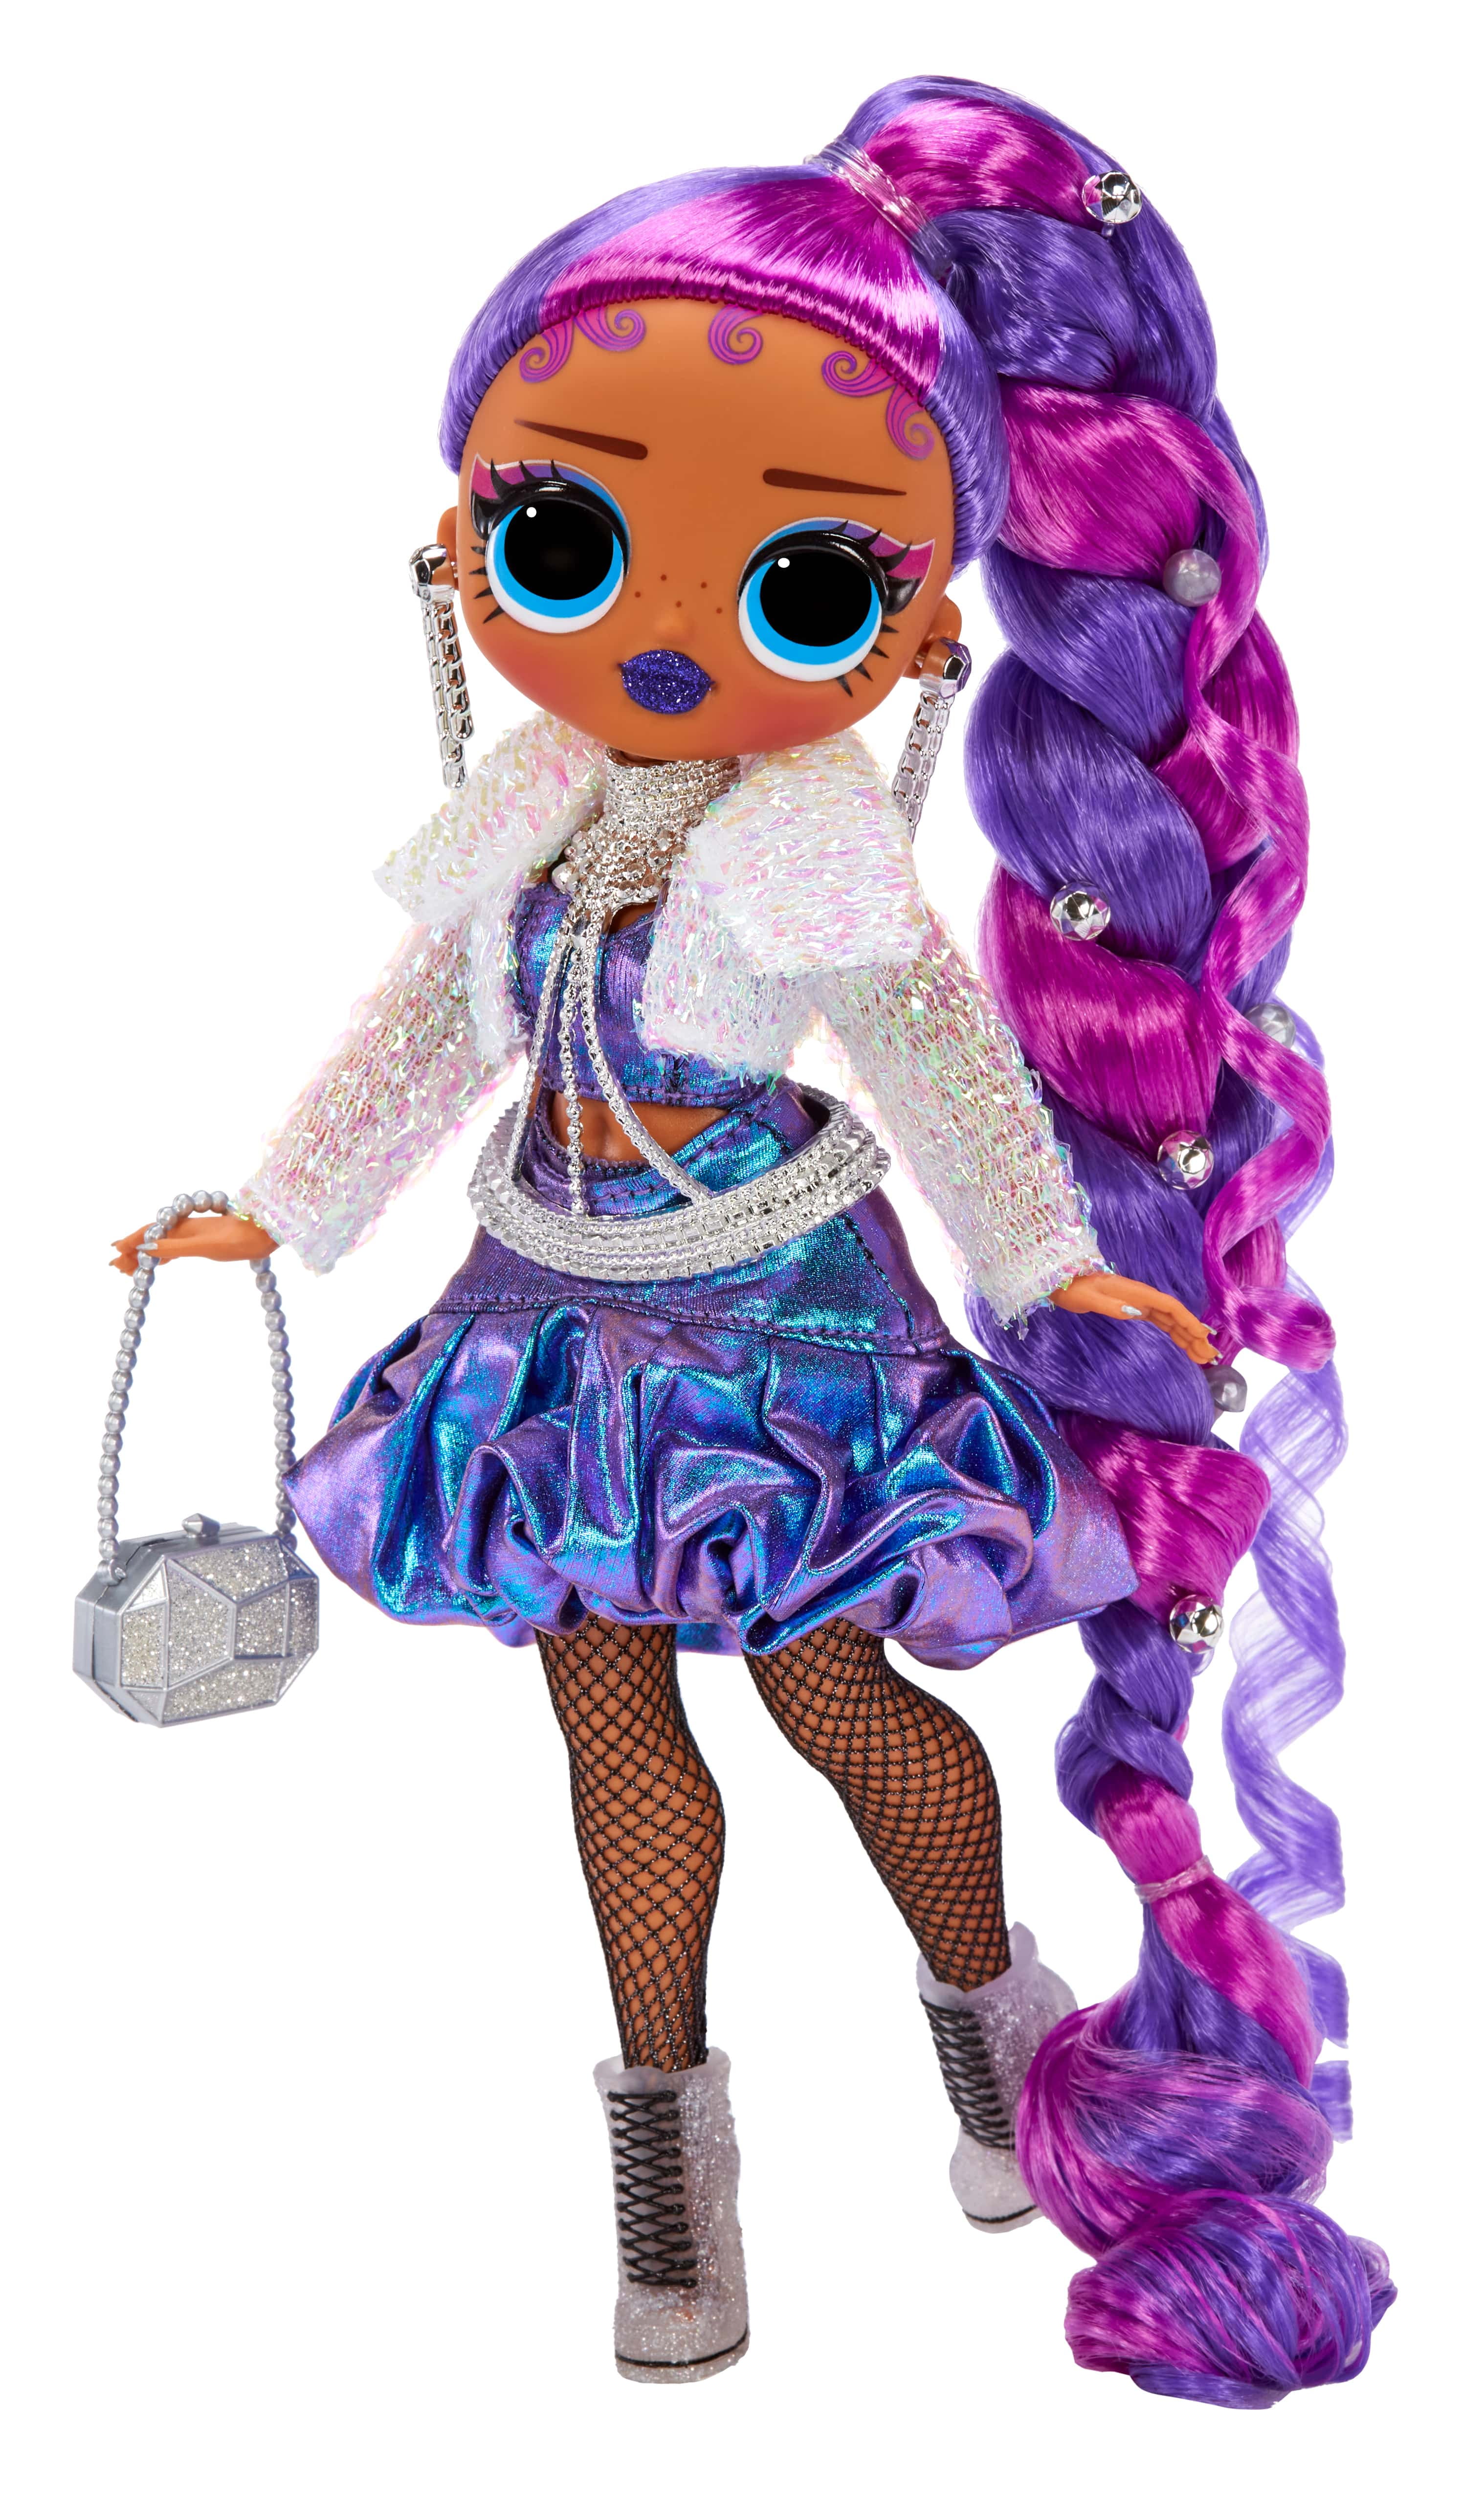 L.O.L Surprise! LOL Surprise OMG Queens Runway Diva fashion doll with 20 Surprises Including Outfit and Accessories for Fashion Toy, Girls Ages 3 and up, 10-inch doll